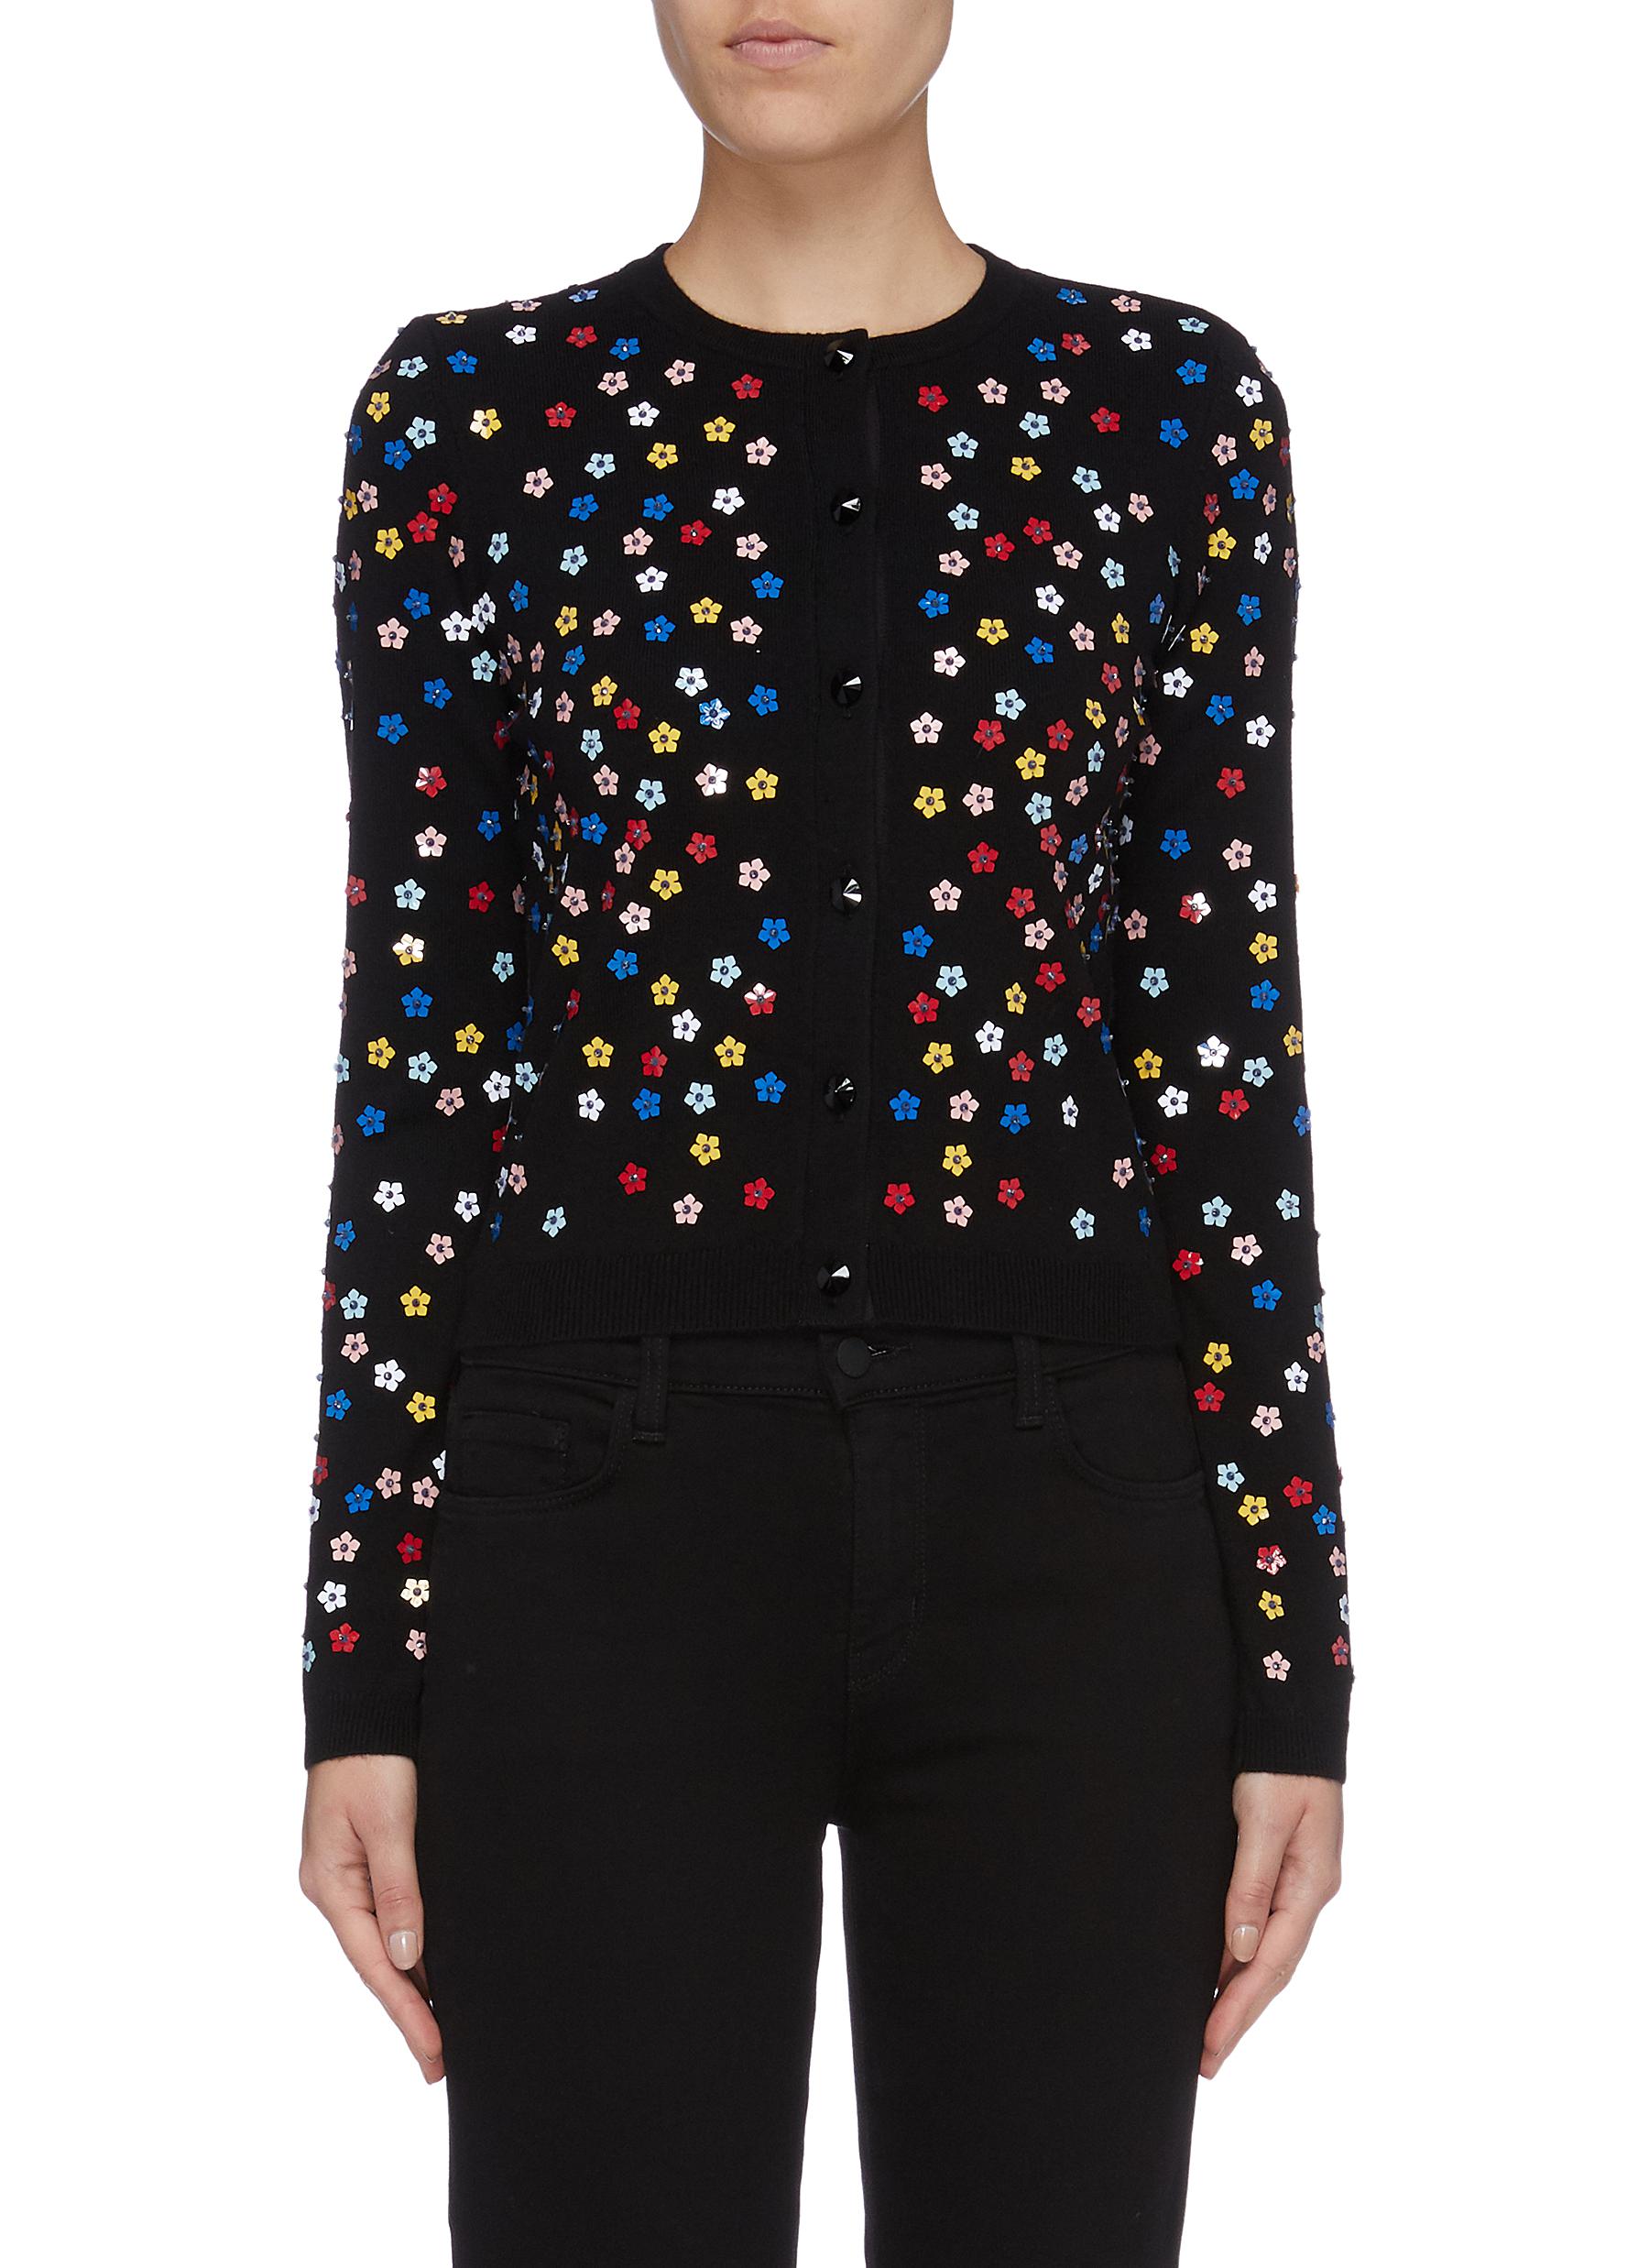 Ruthy floral embellished cardigan by Alice + Olivia